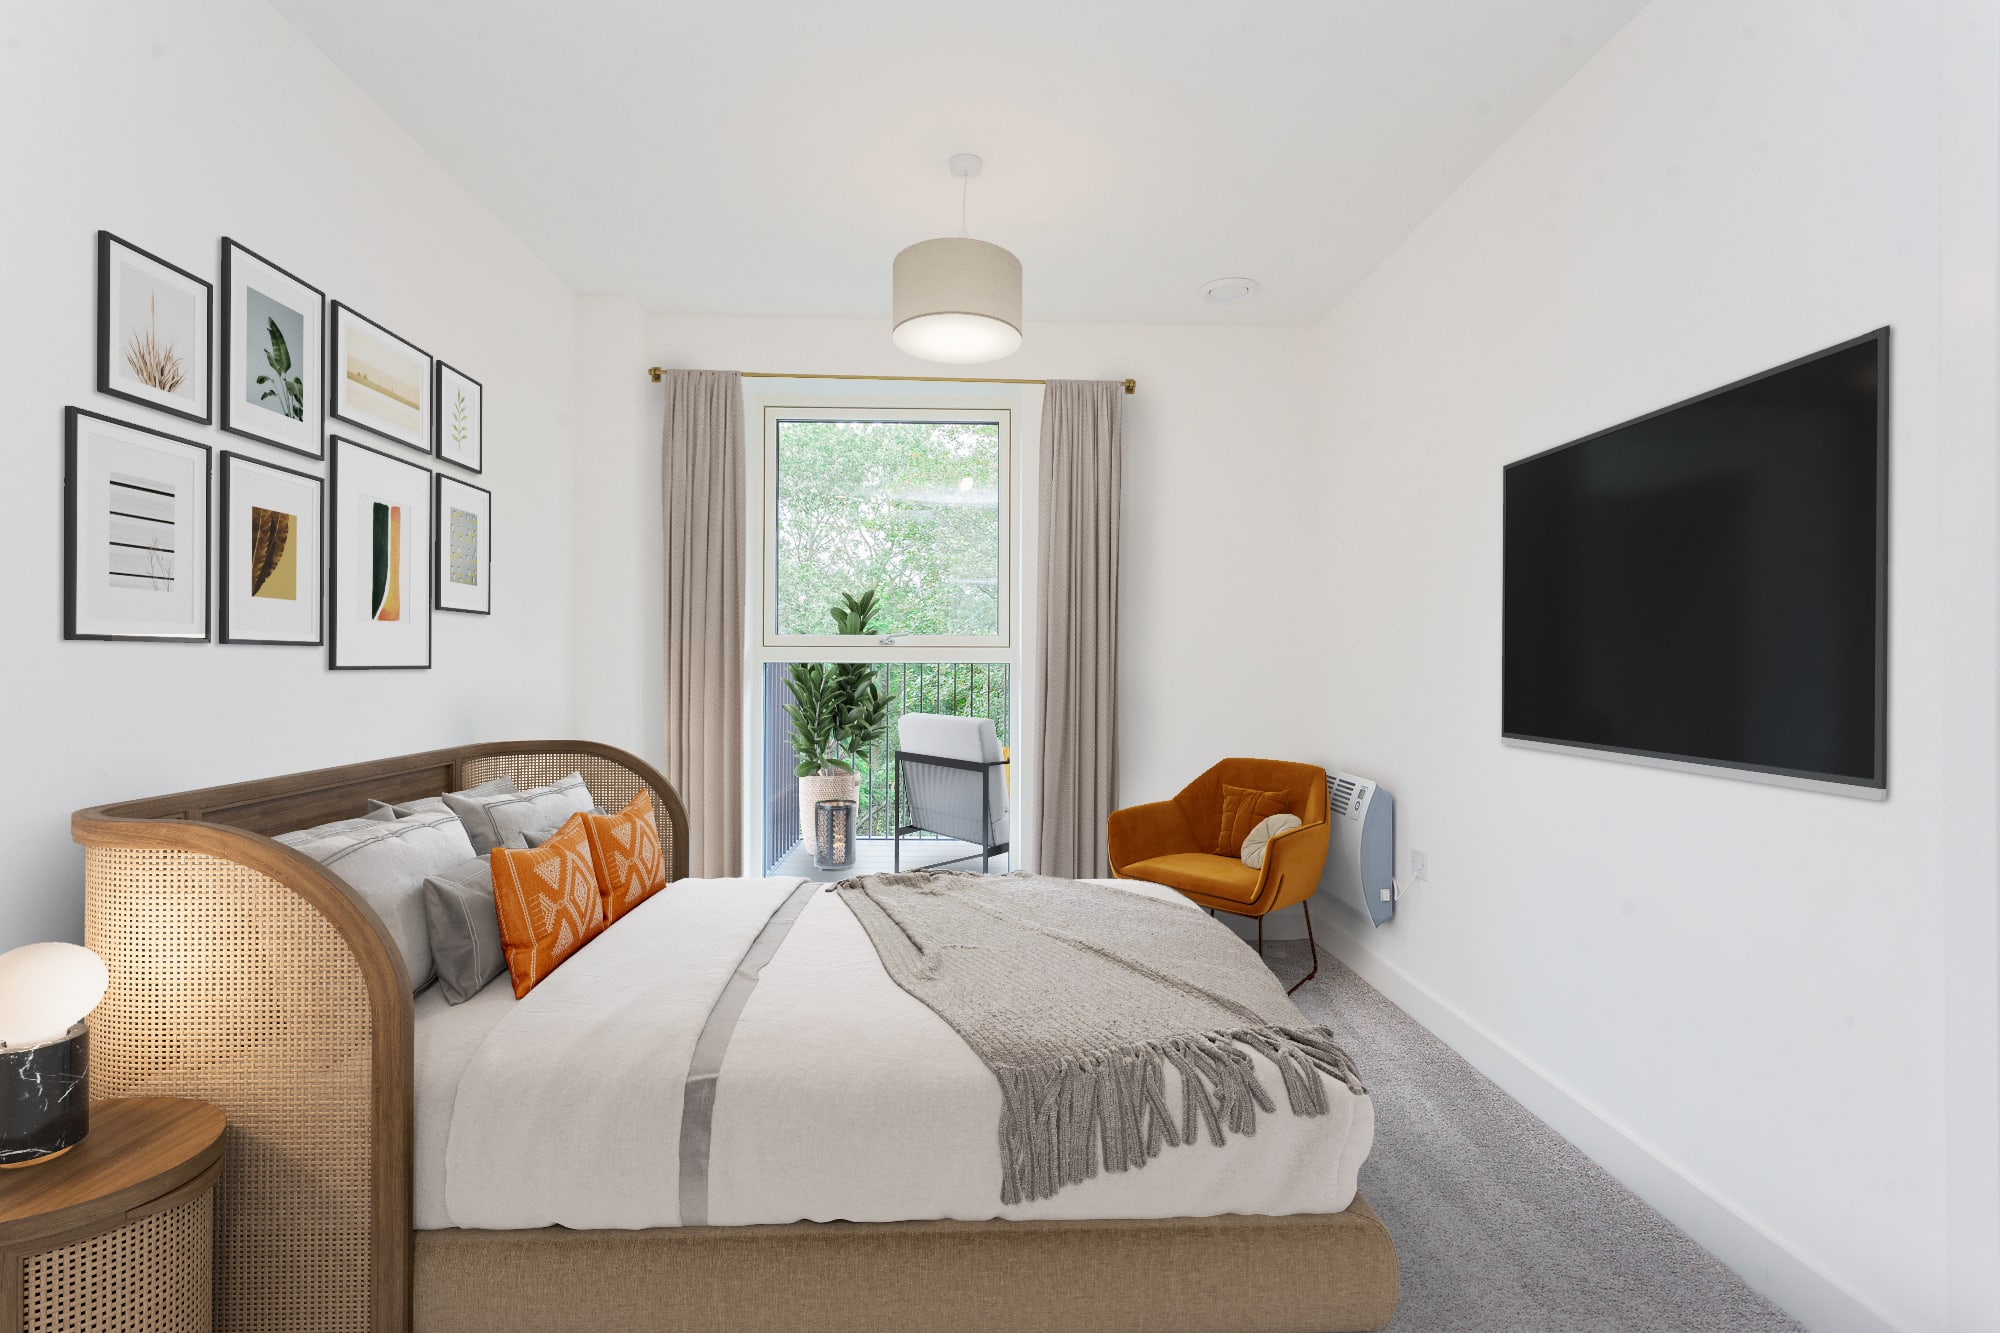 Internal image of a bedroom - City House, Legal & General Affordable Homes - available to purchase through Shared Ownership on Share to Buy!